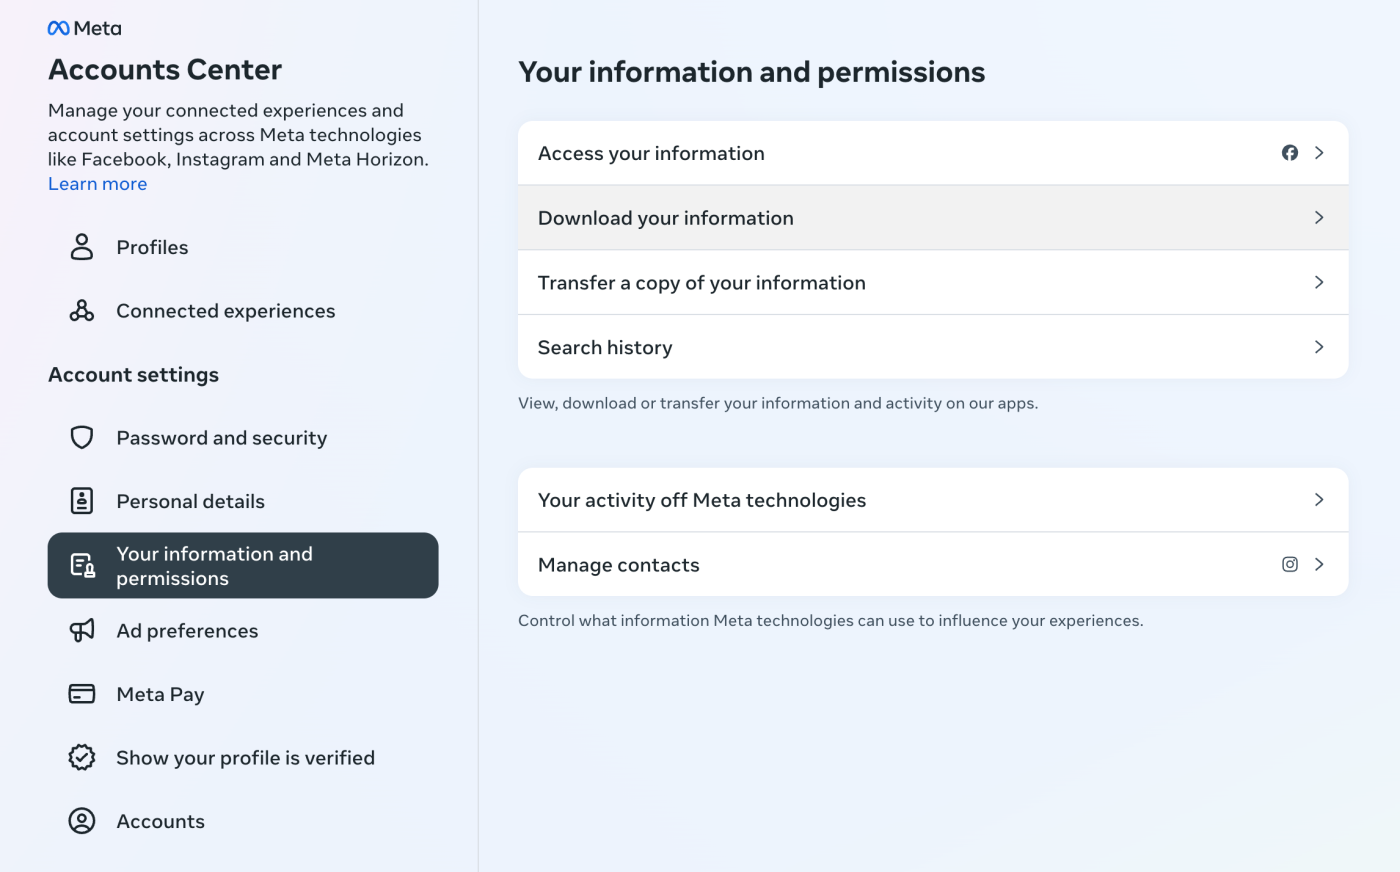 Your information and permissions page in the Meta Account Center. 